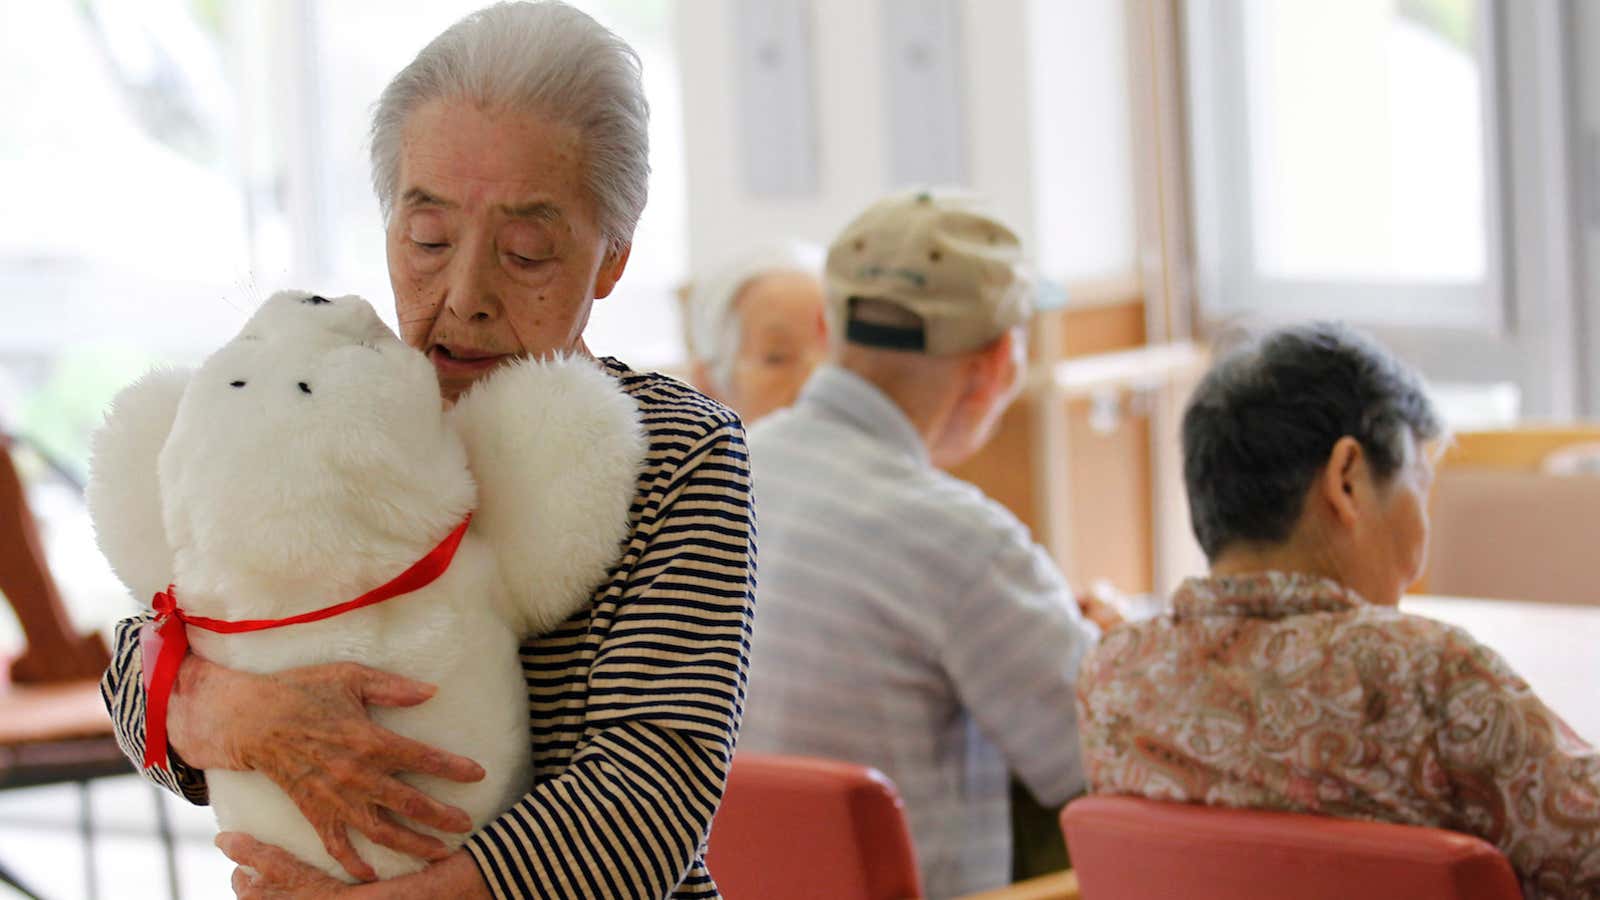 Paro the robotic seal has become common in nursing homes—but at what cost?